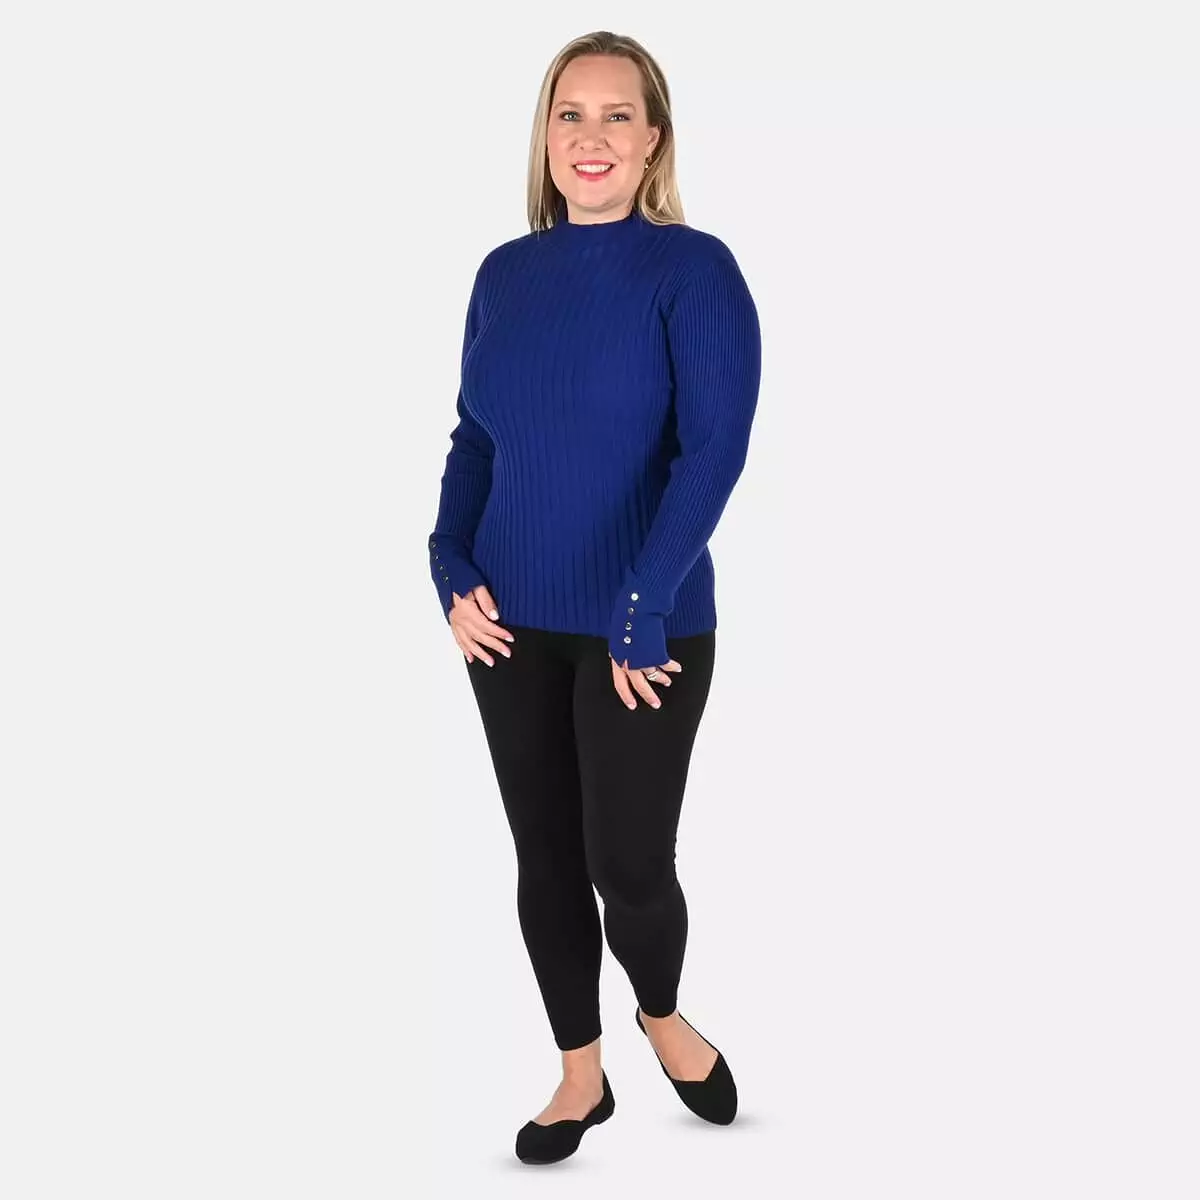 Tamsy Blue Ribbed Knit Sweater - L
